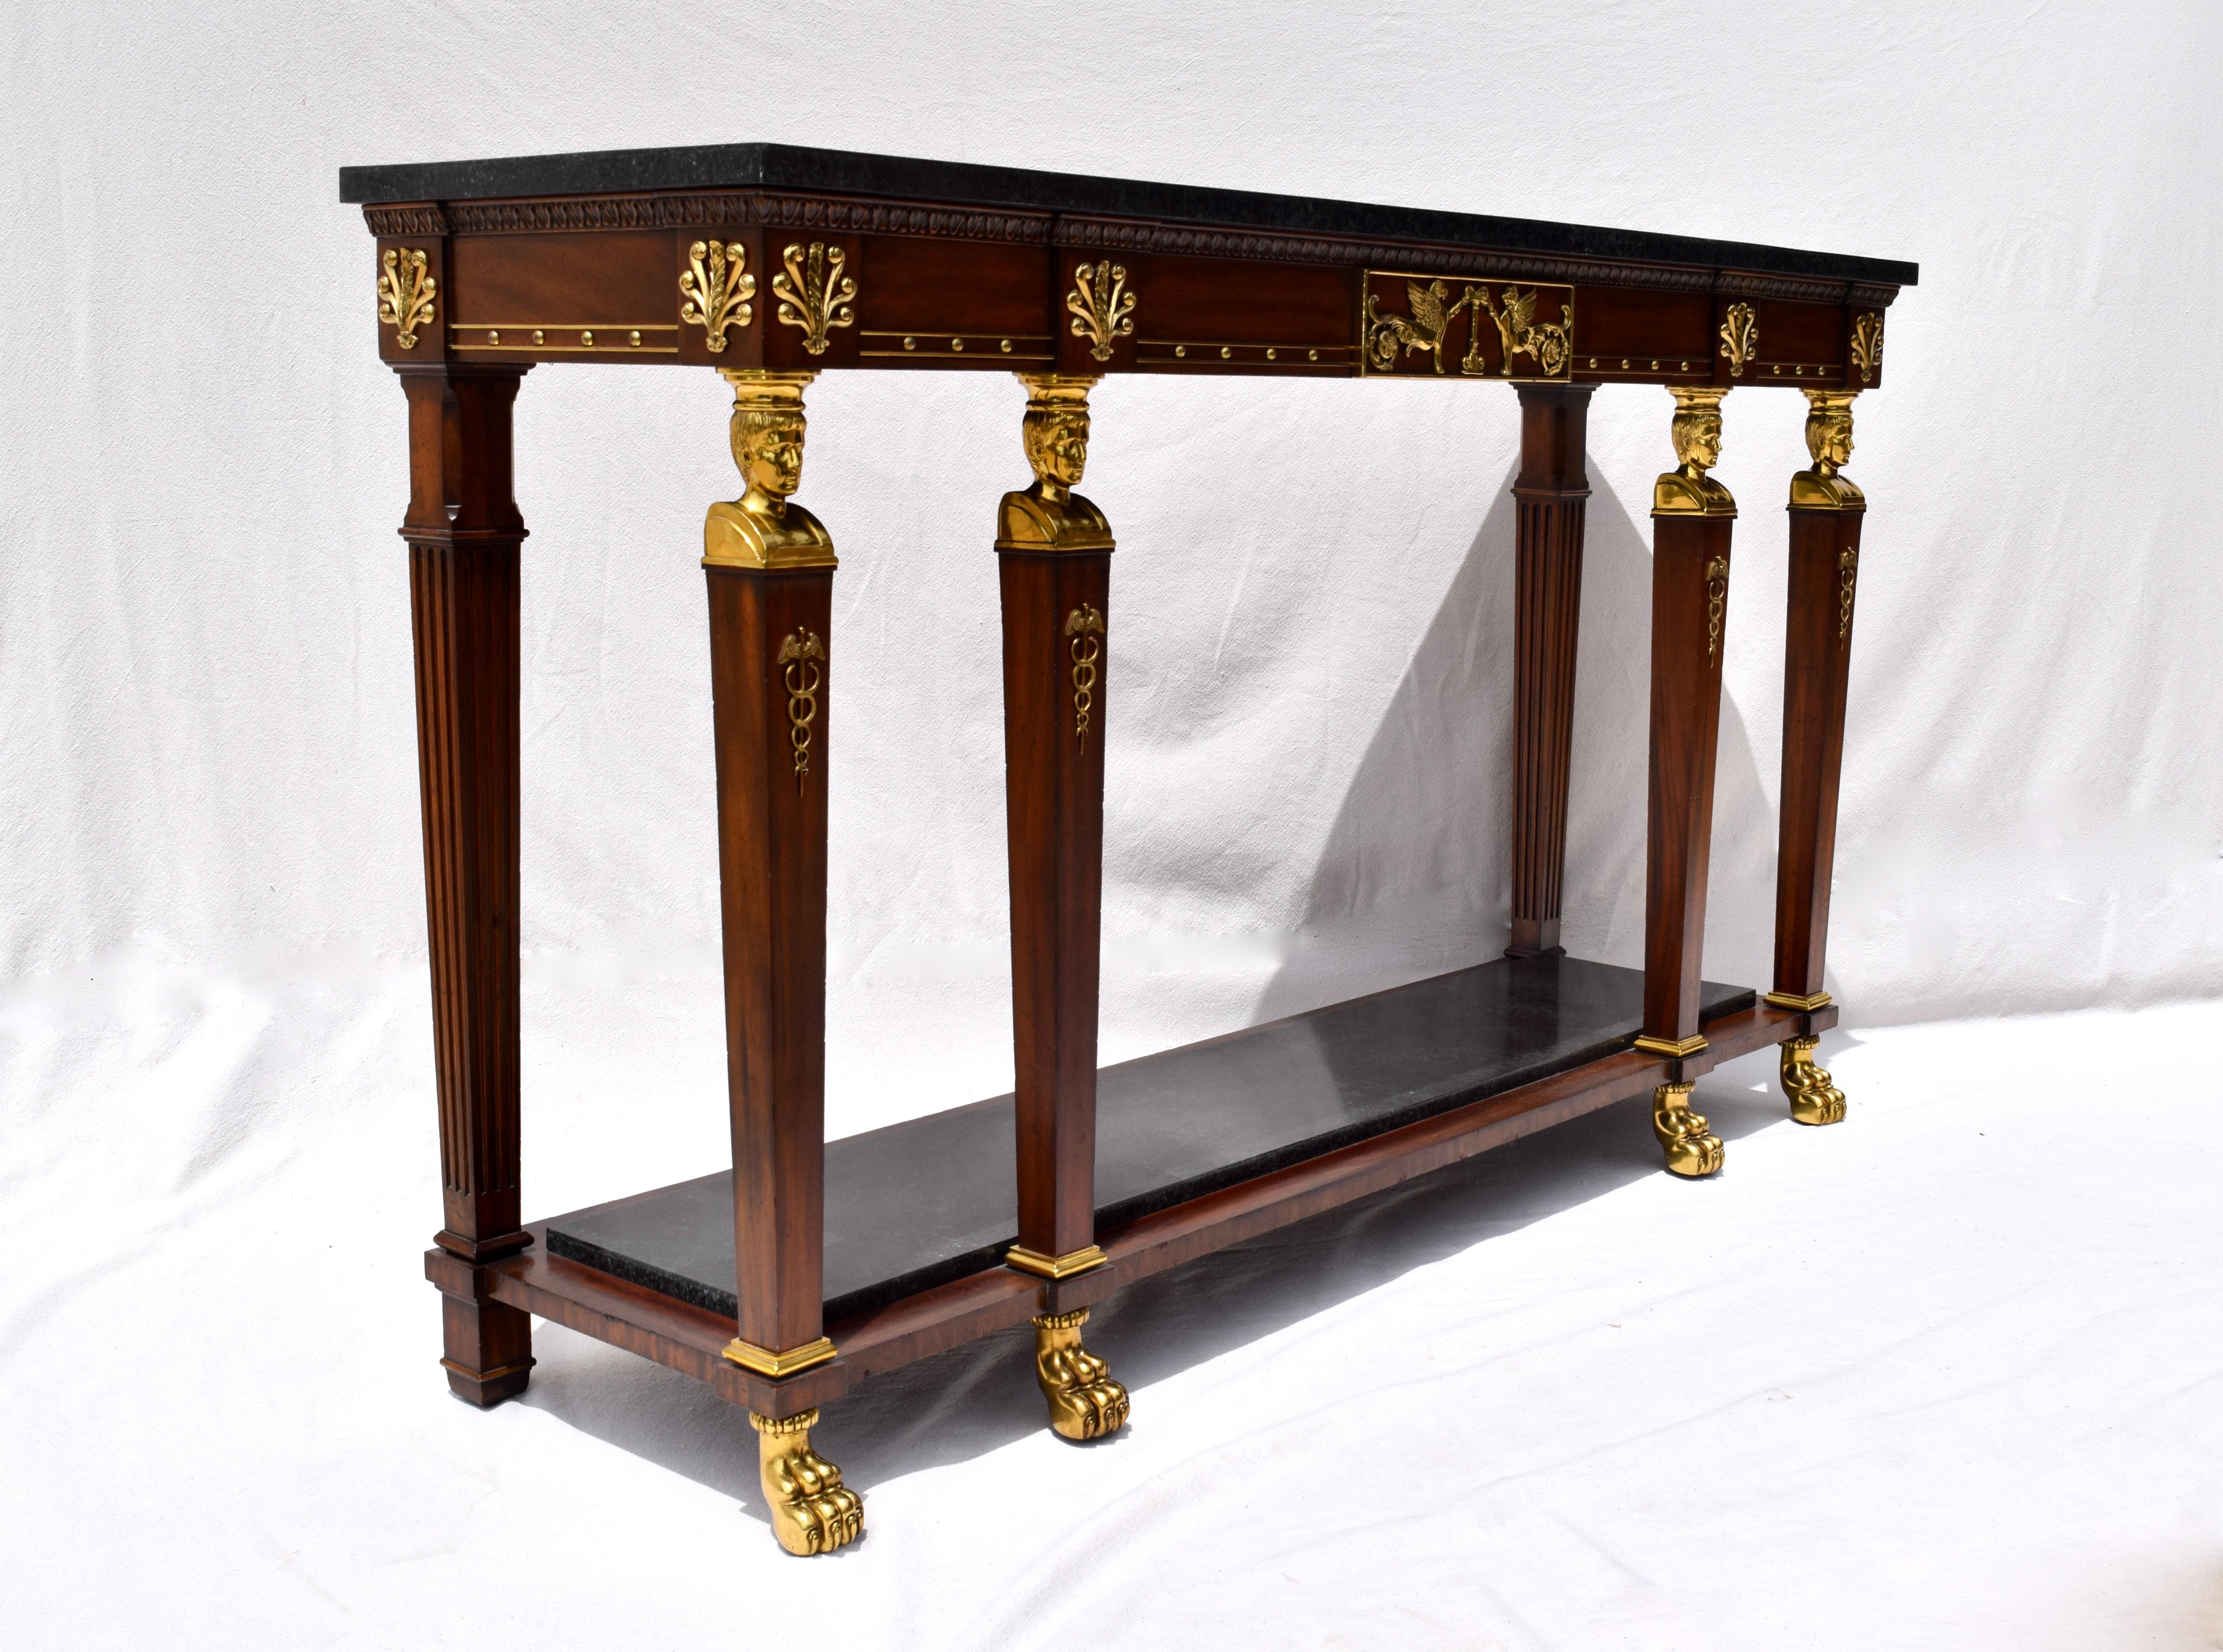 Neoclassical French Empire Style Pier Table by Maitland Smith 1